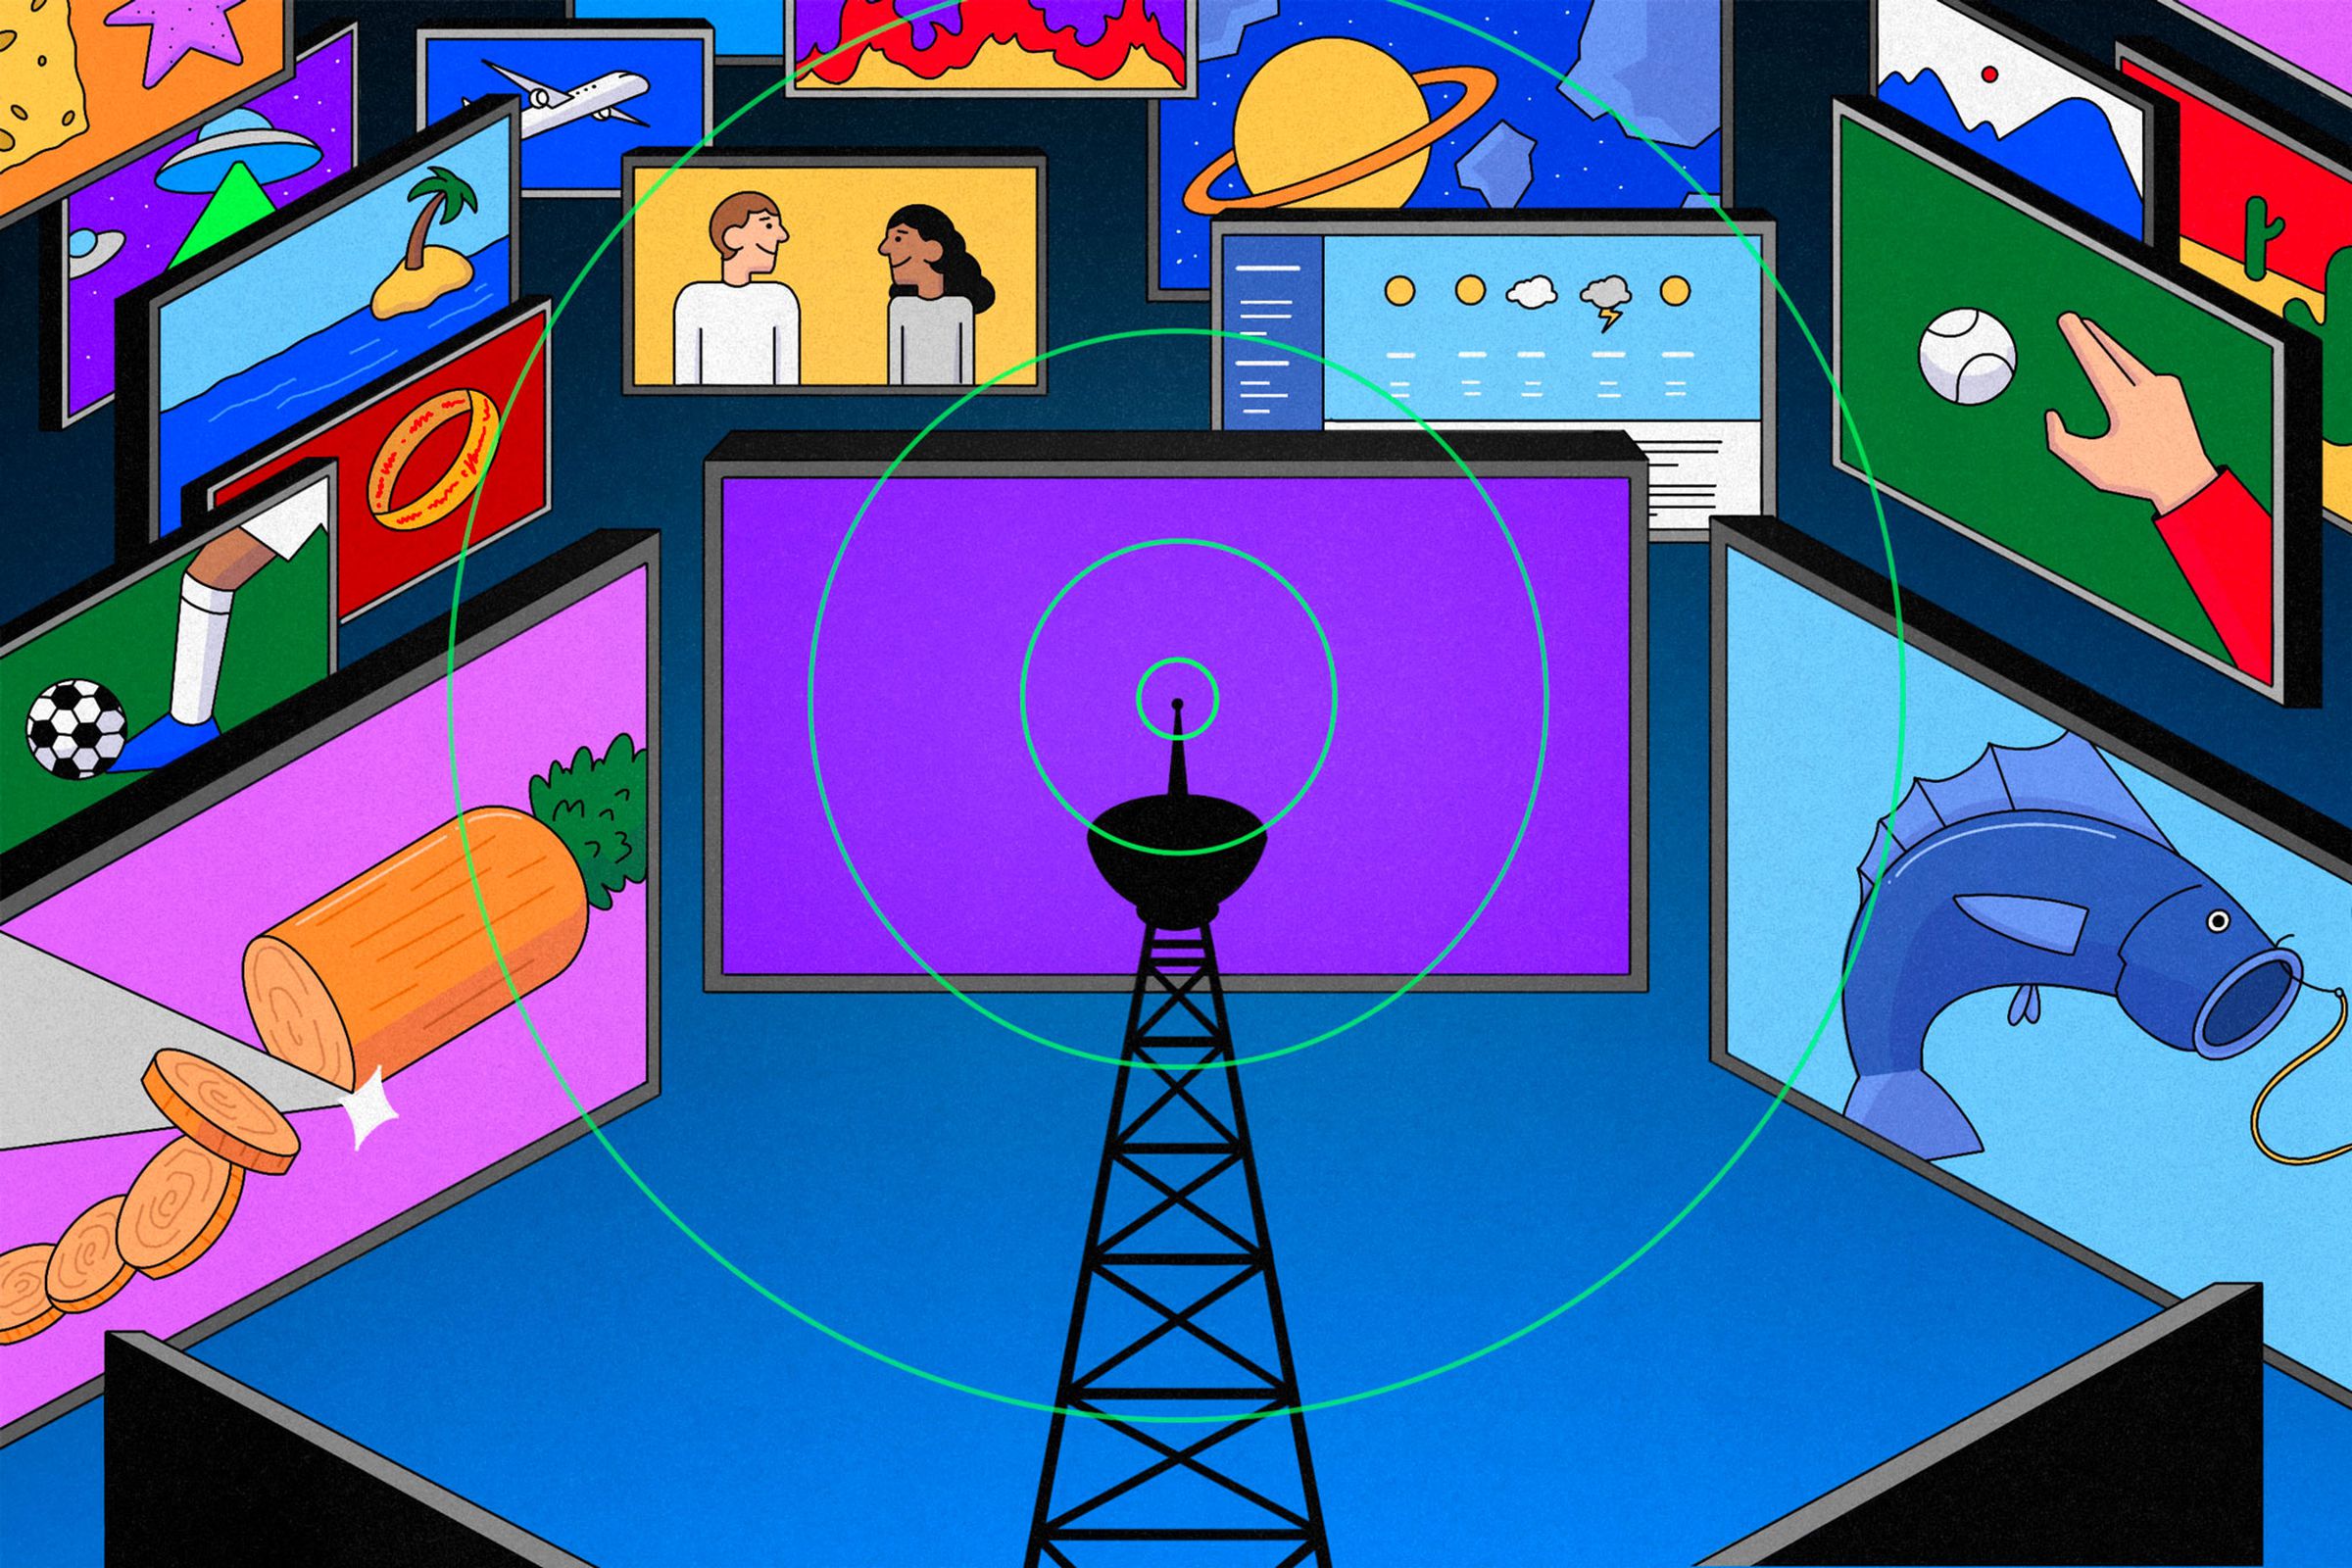 An illustration of a broadcast tower sending out signals to a variety of colorful TVs showing different images (a fish, a carrot, a soccer player, a baseball)